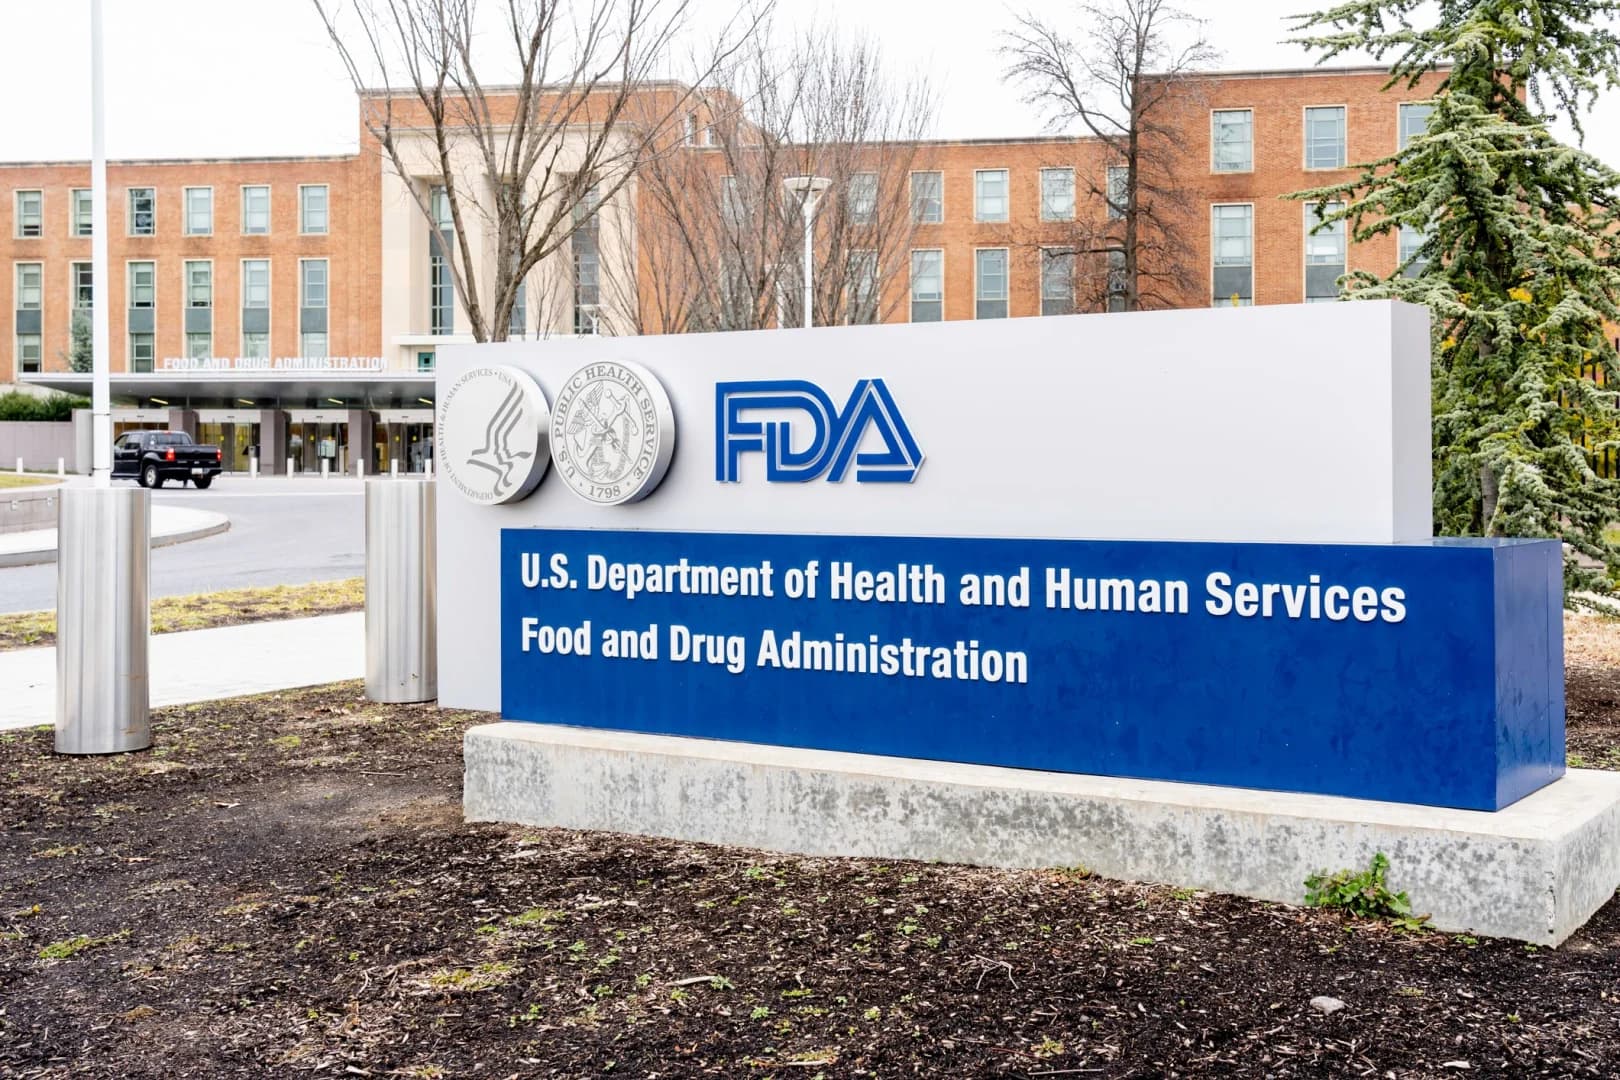 FDA asks for 55 years to review its Pfizer-BioNTech data before releasing to public